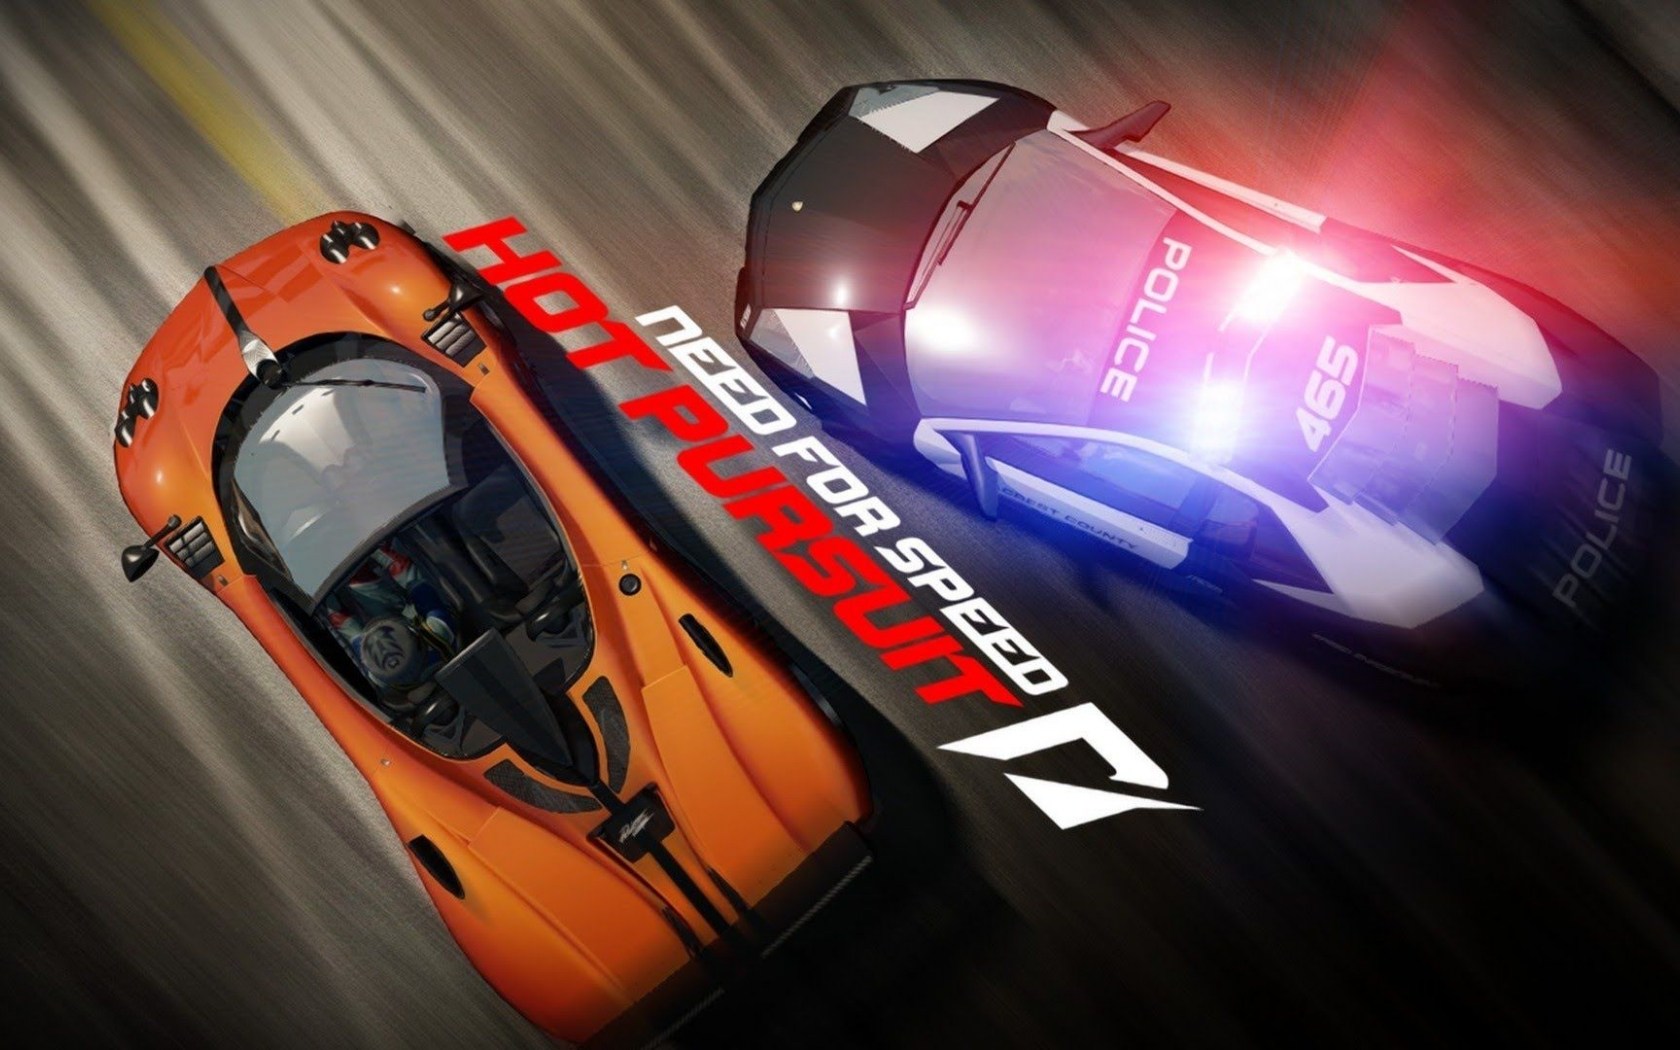 need for speed hot pursuit 2 cdkey